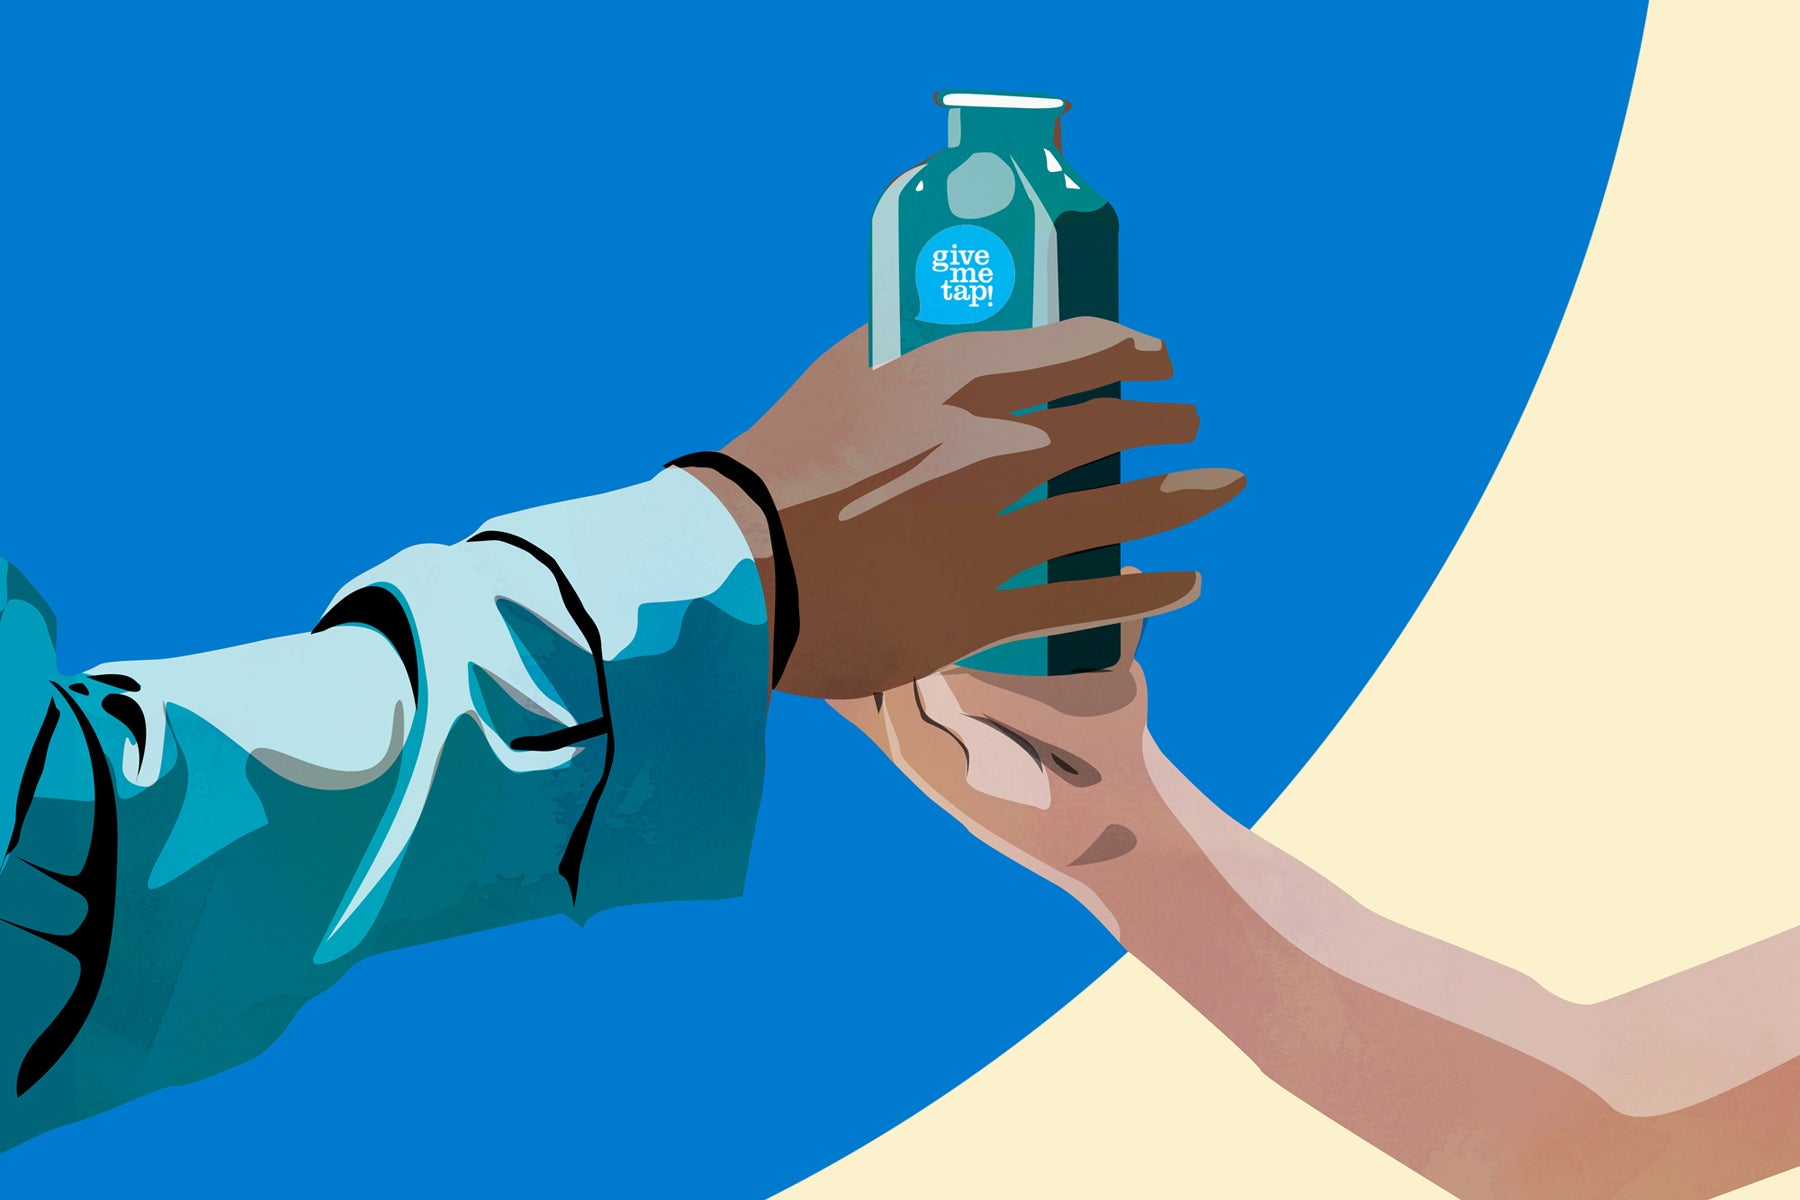 Illustration of hands holding a reusable stainless steel bottle by GiveMeTap.